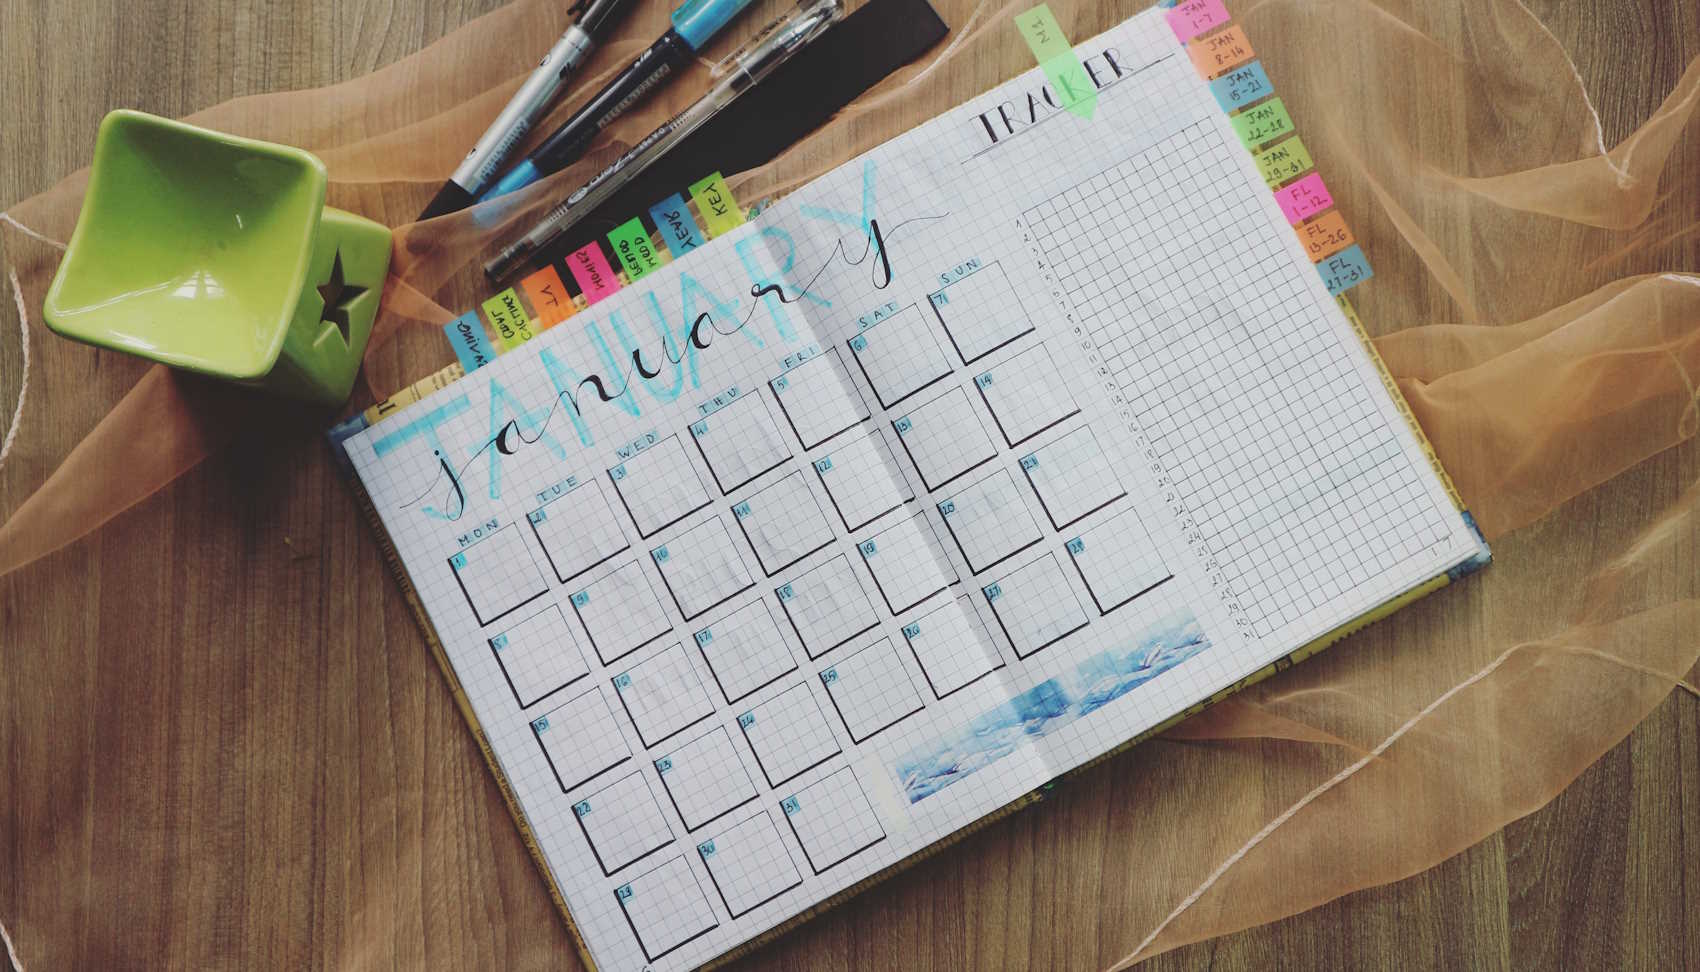 Picture of planner opened up to a monthly calendar.